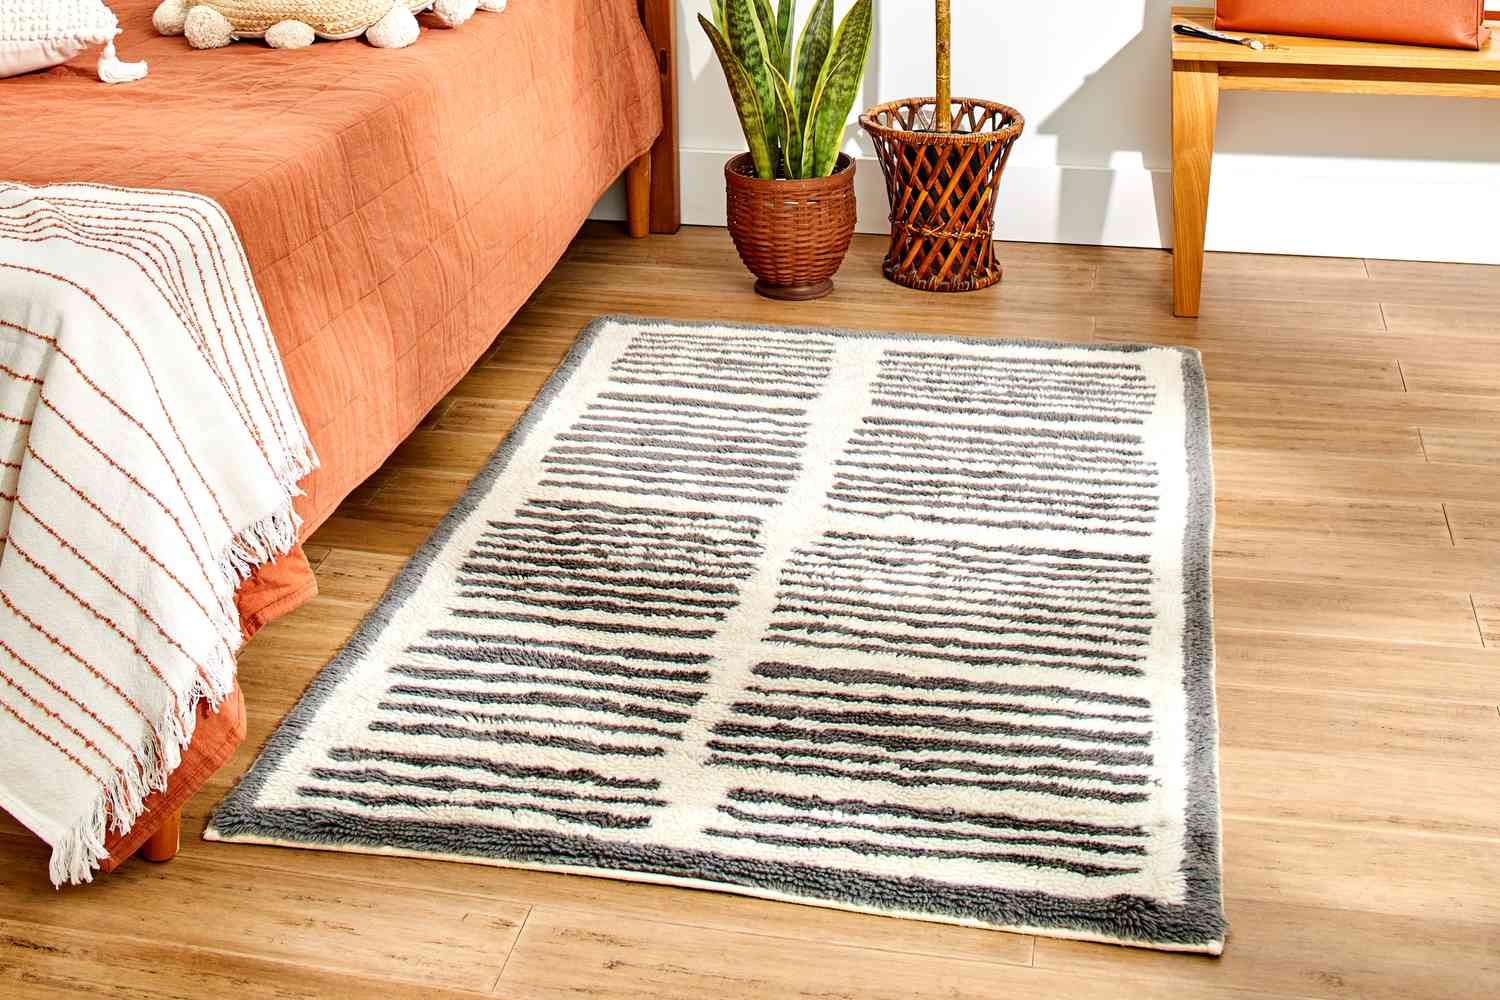 The AllModern Machine Washable Hand-Woven Wool Ivory/Charcoal Area Rug in a bedroom setting